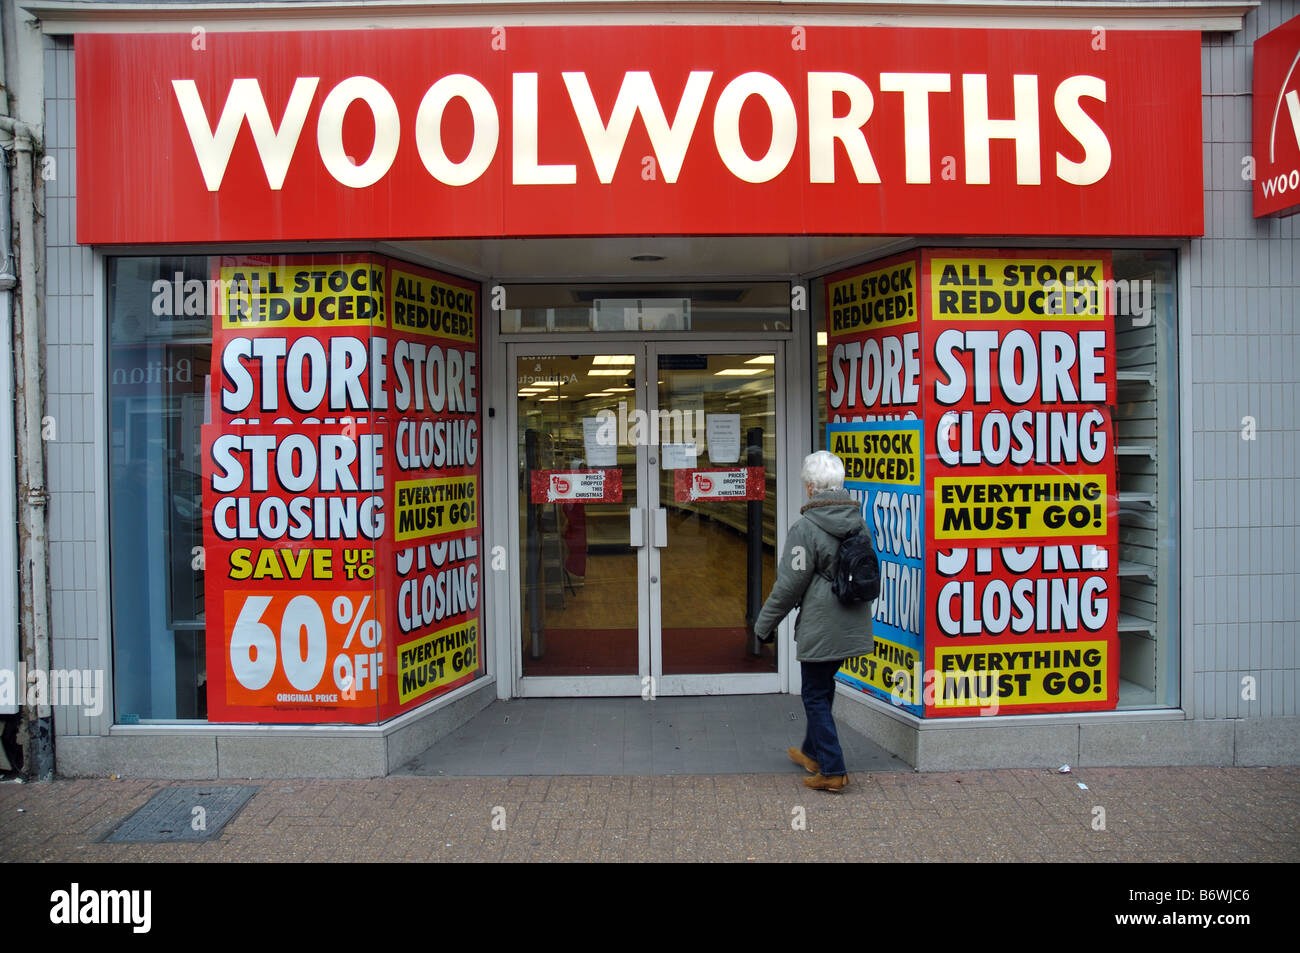 Woolworths Store Closing, Empty Hight Street Shop, Newport, Isle of Wight, England, UK, GB. Stock Photo